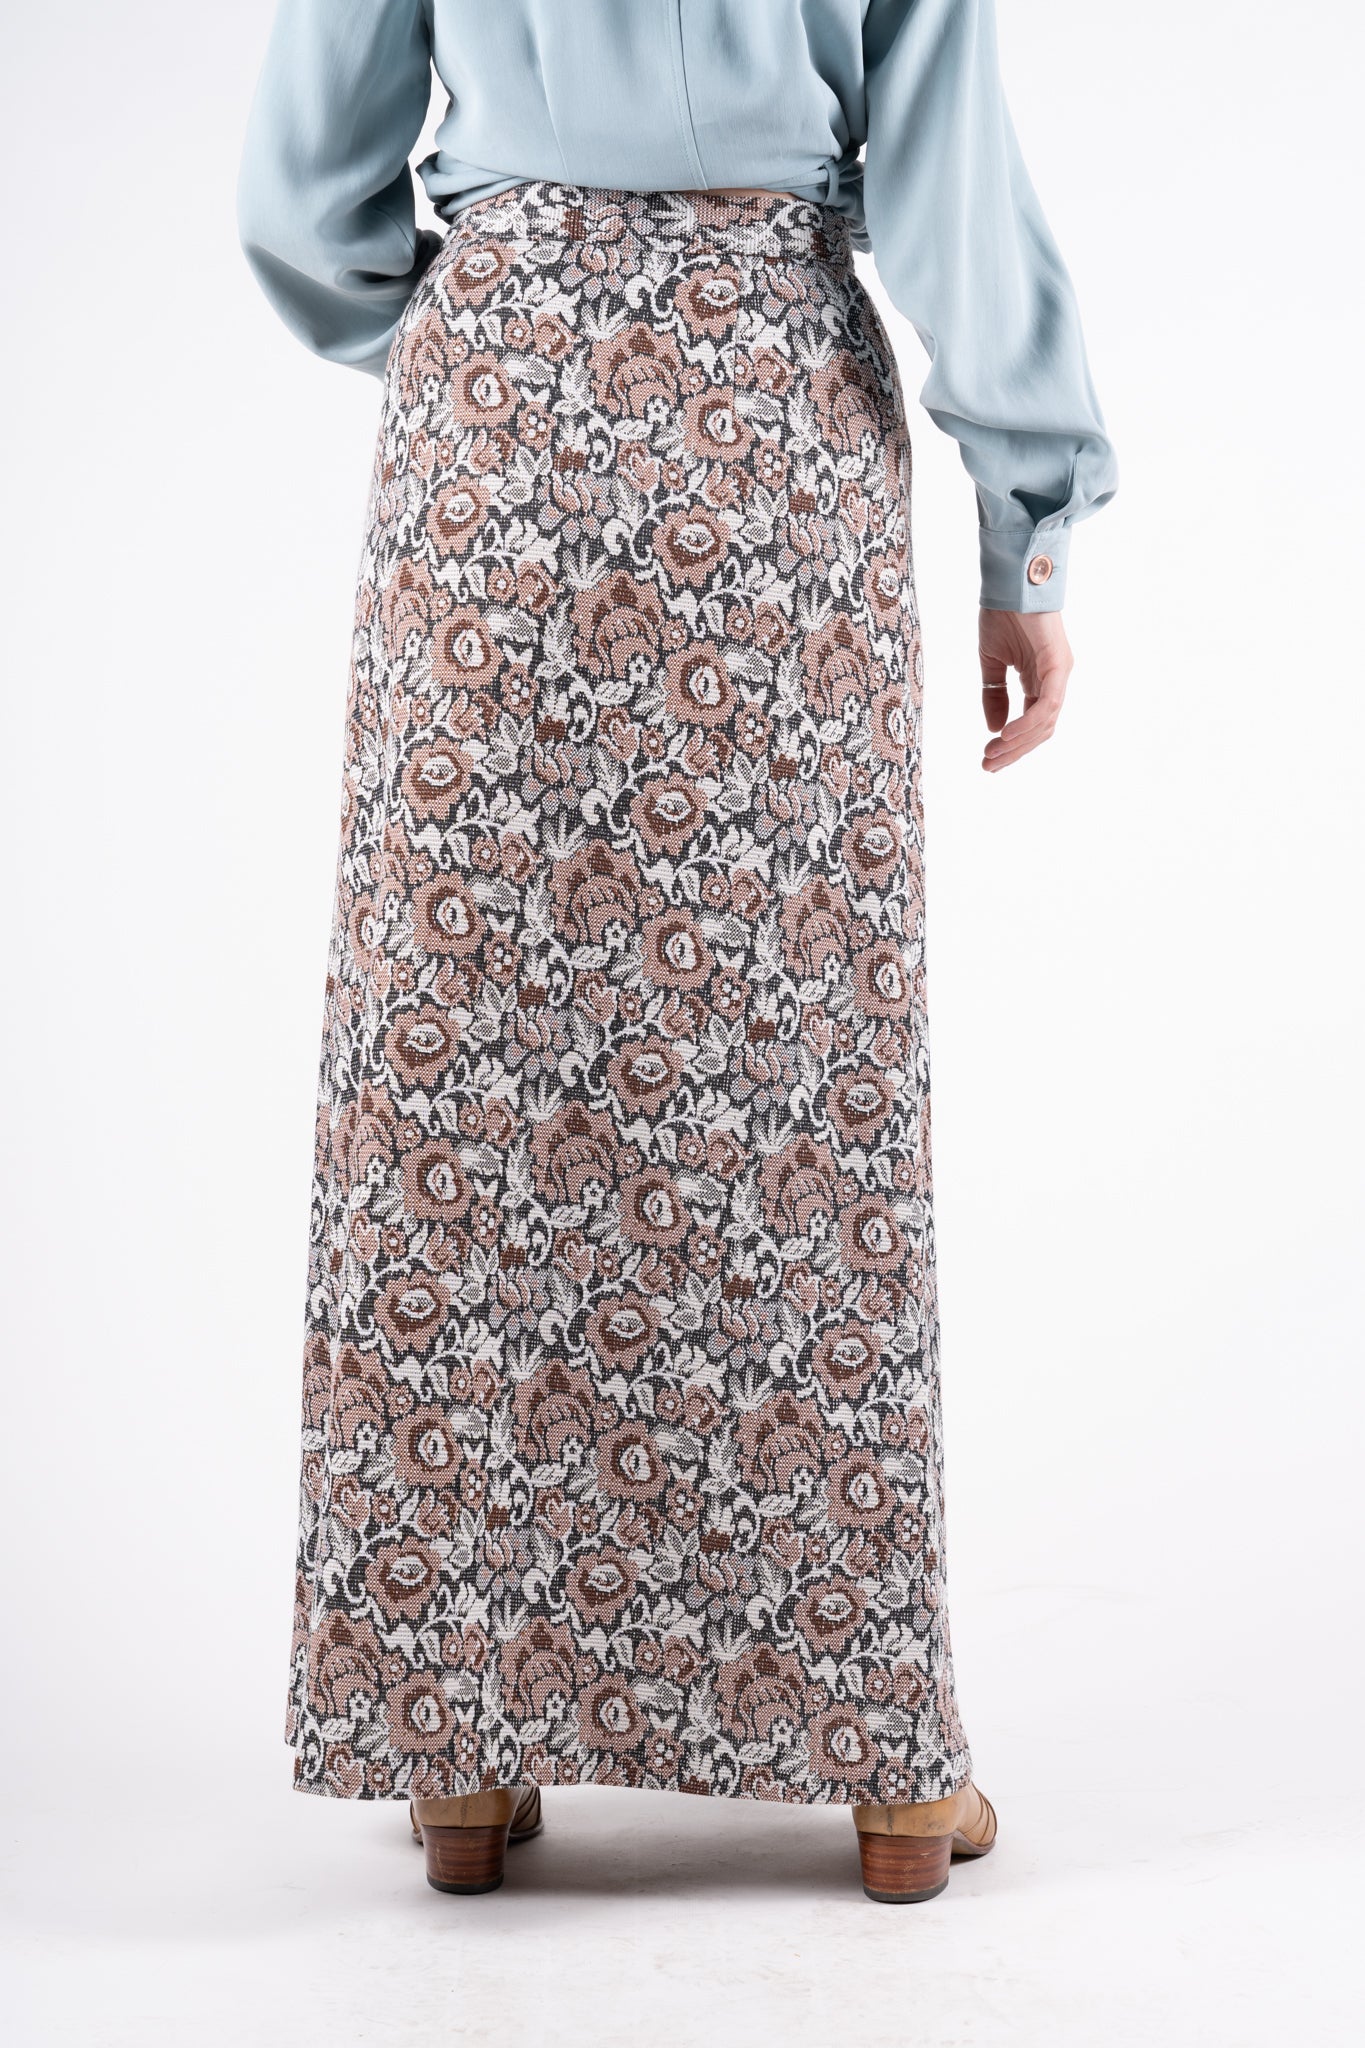 Floral Tapestry Skirt - M